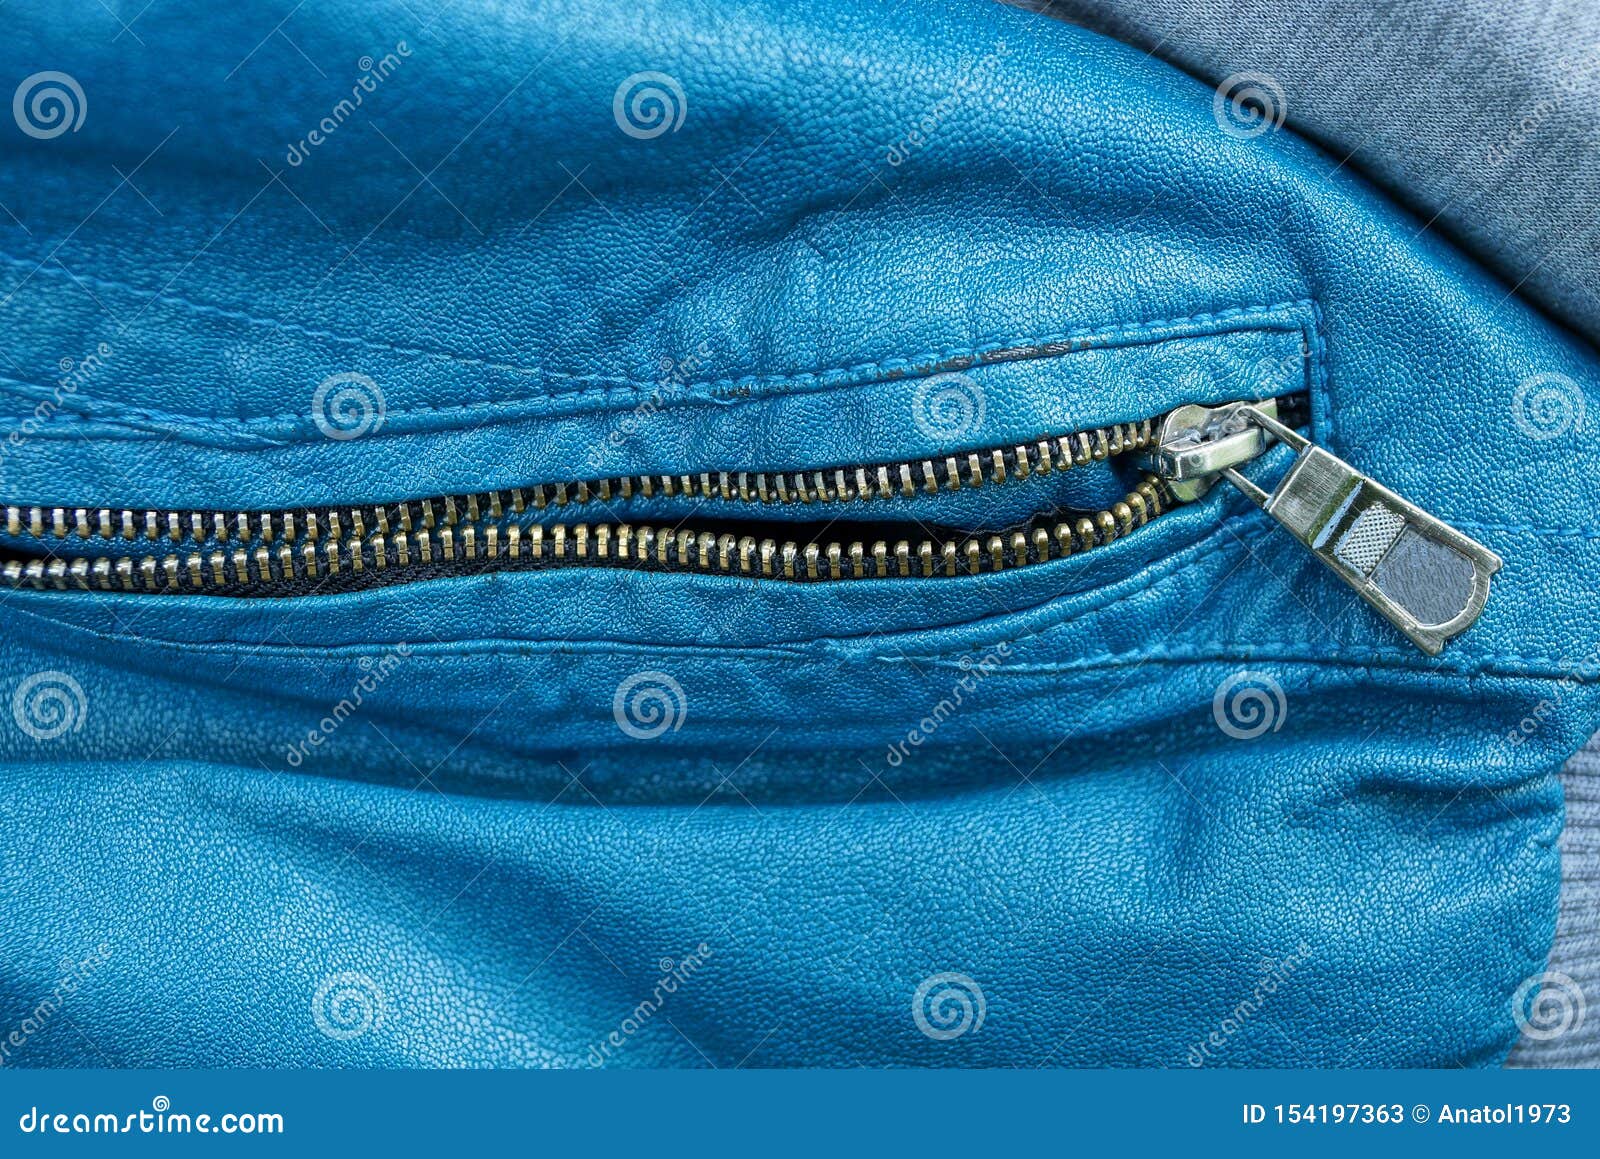 Metal Zip on Blue Skin on a Piece of Clothing Stock Image - Image of ...